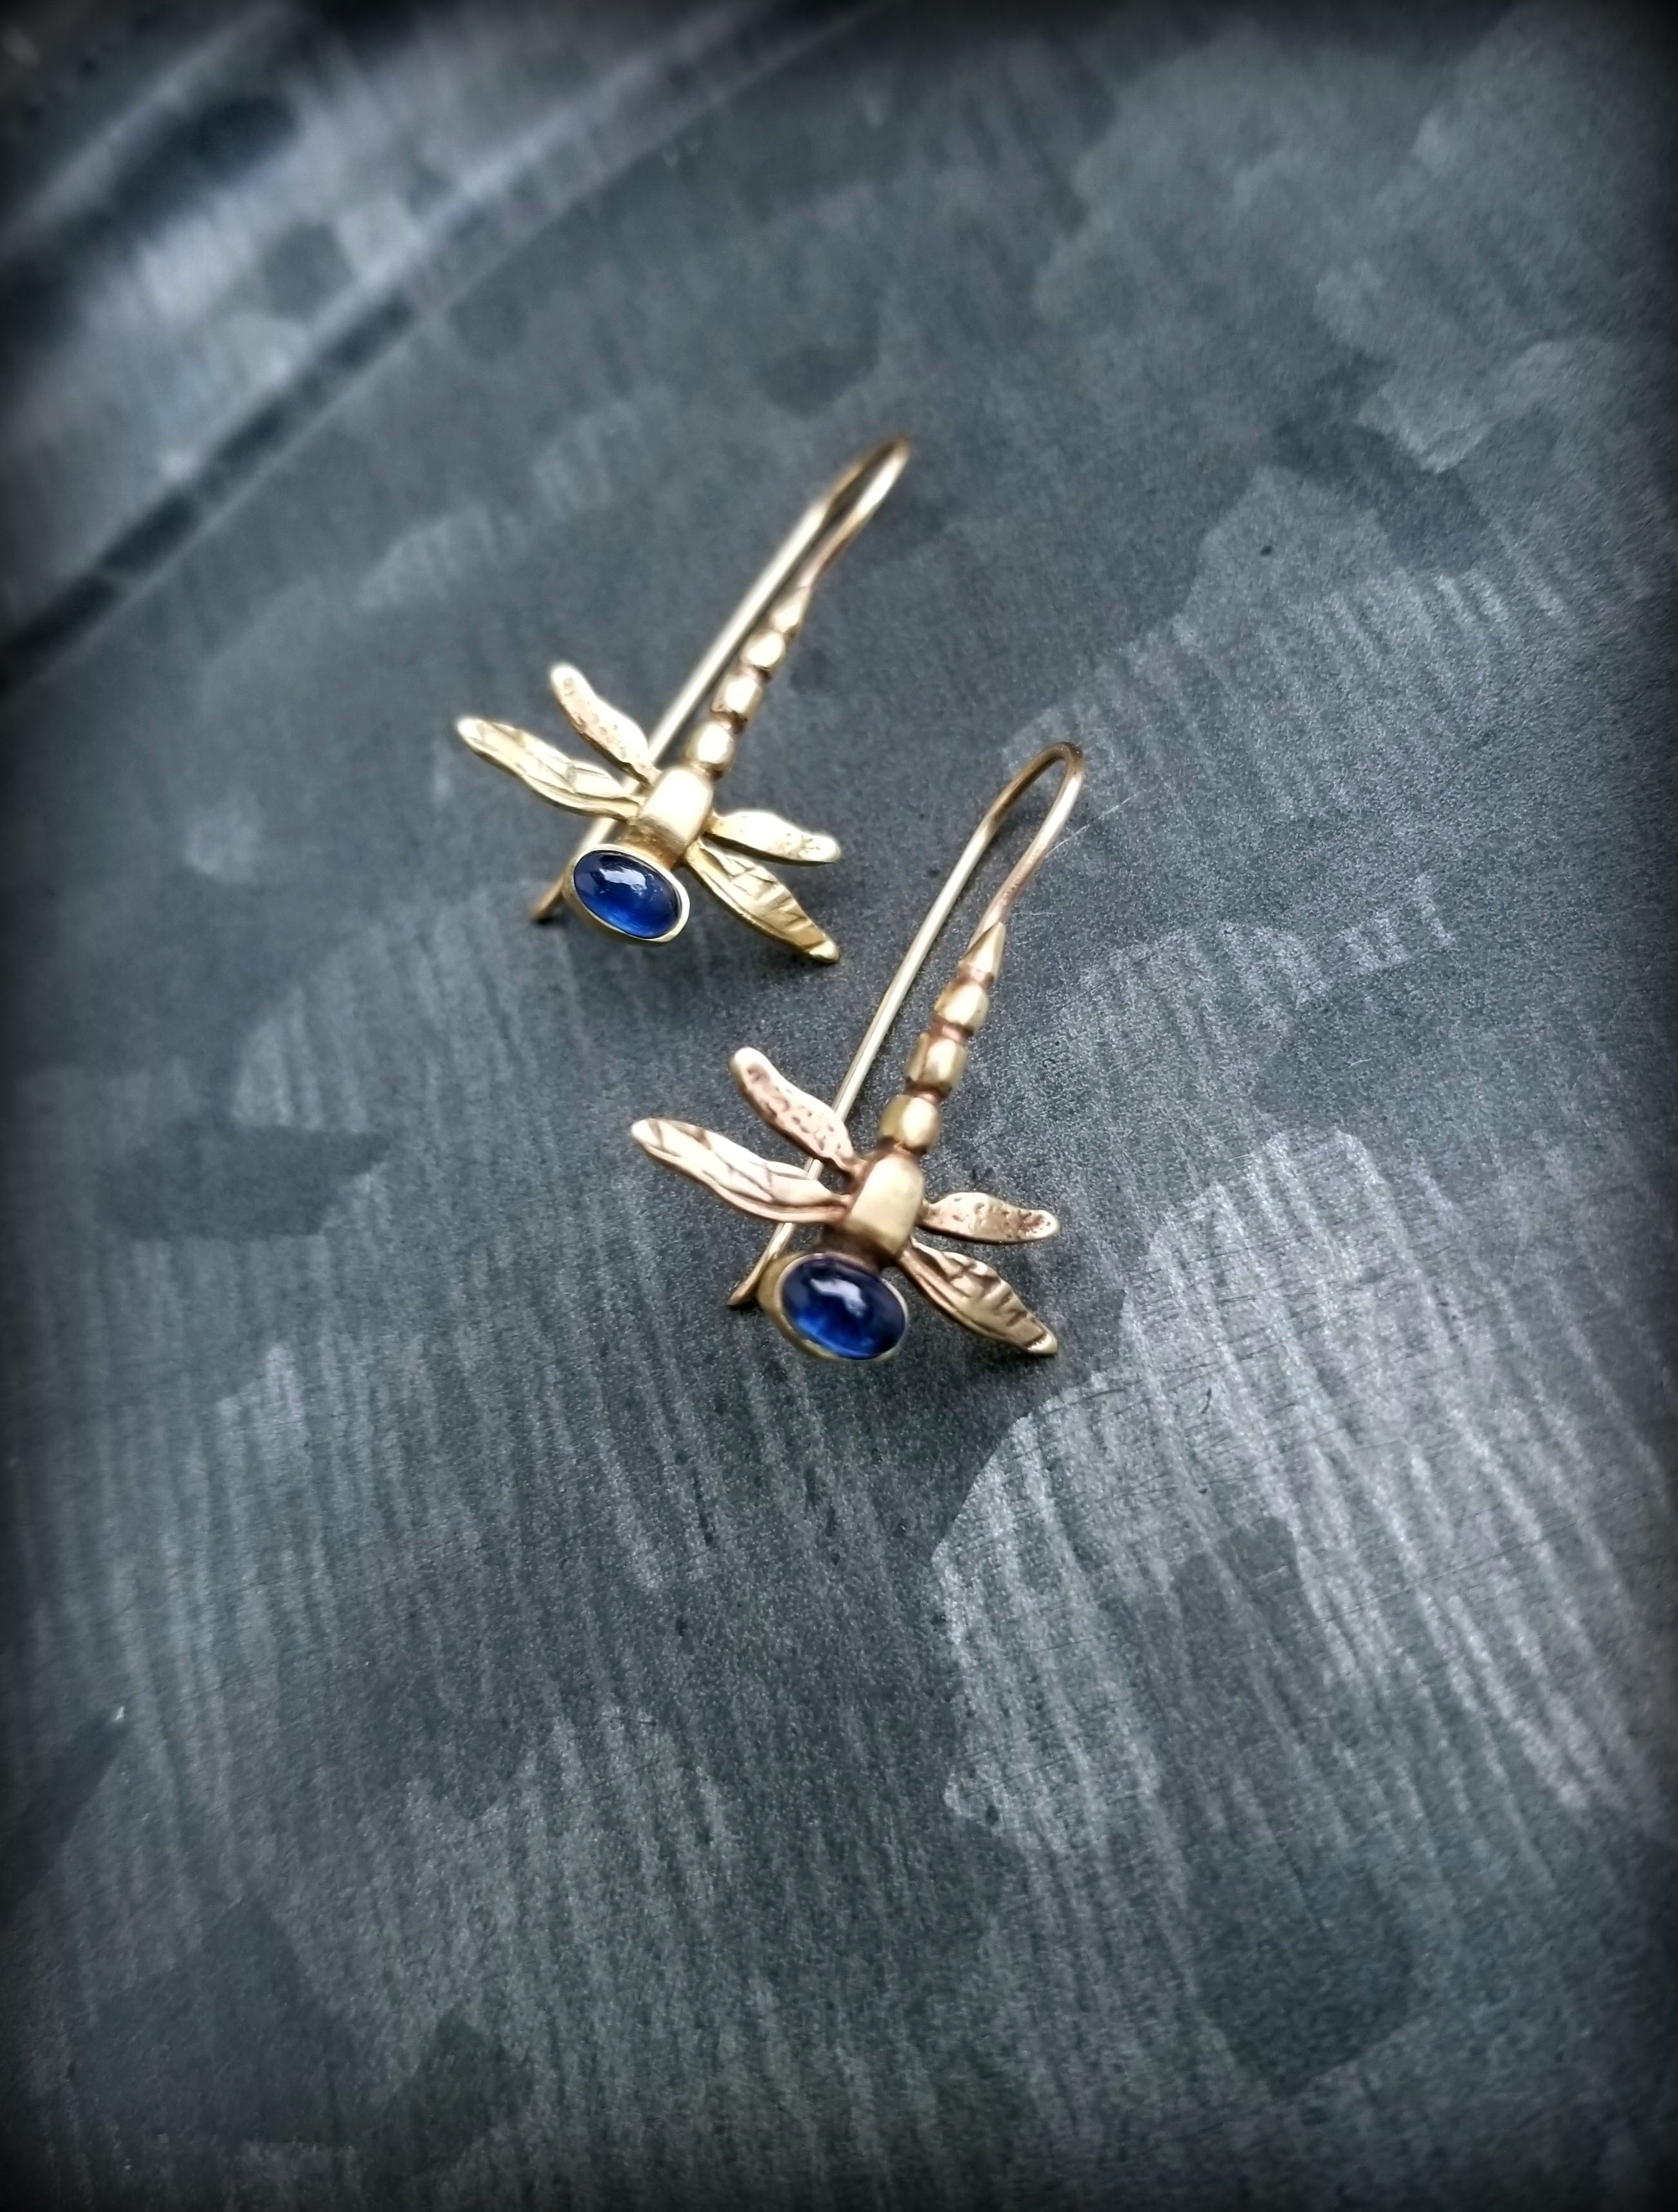 14k Gold Dragonfly Earrings set with Sapphire, Emerald or Ruby Cabochons